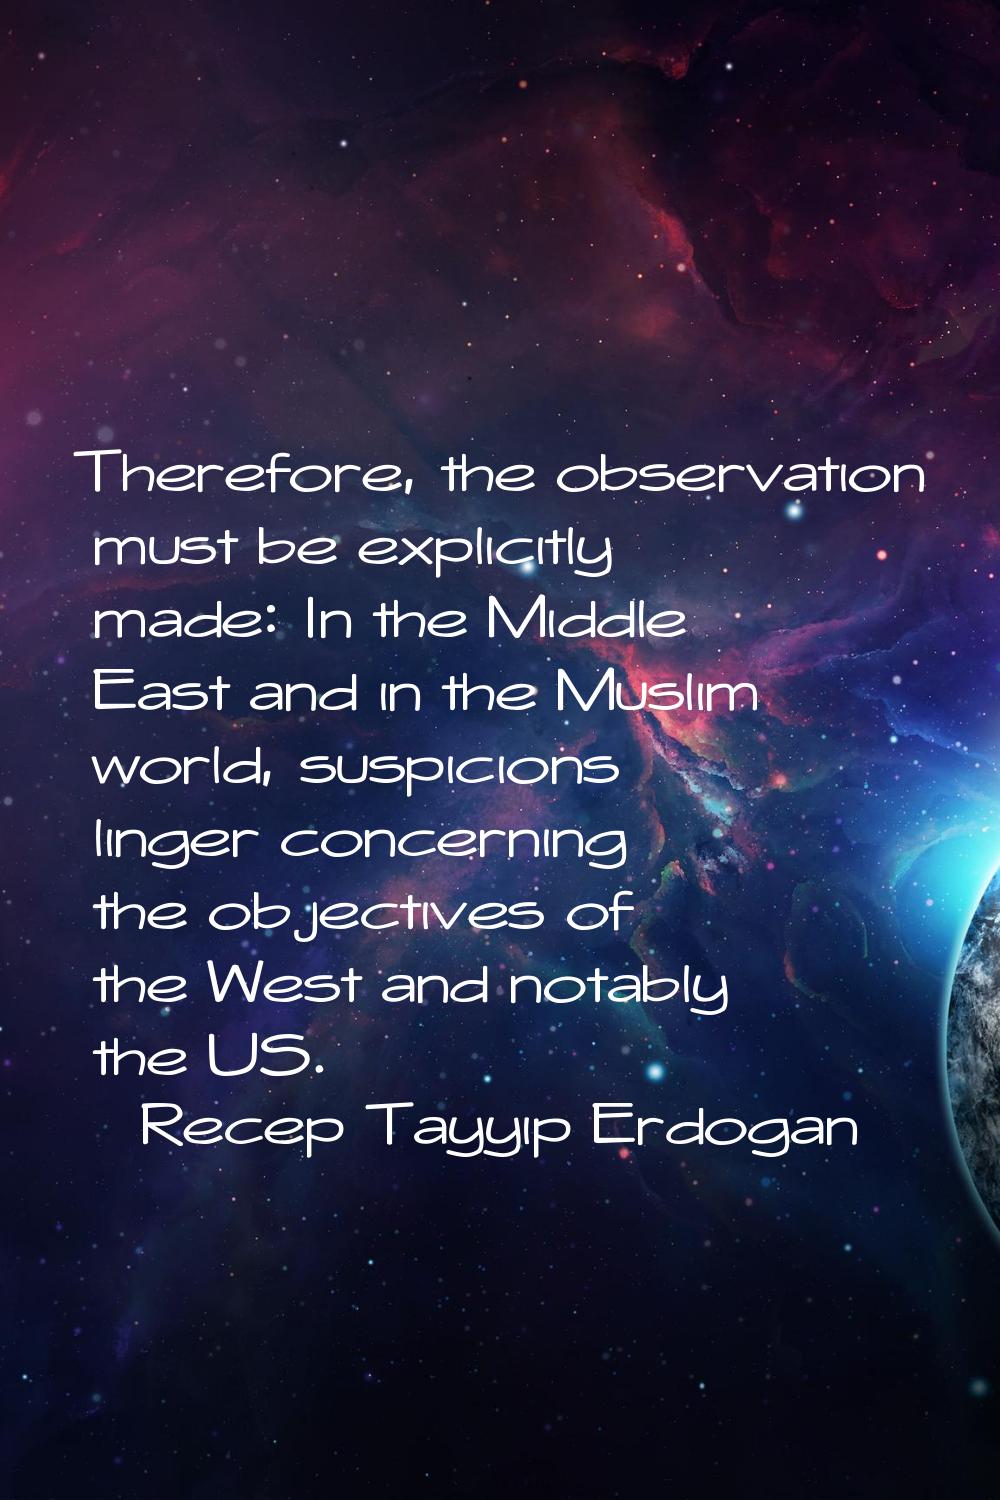 Therefore, the observation must be explicitly made: In the Middle East and in the Muslim world, sus